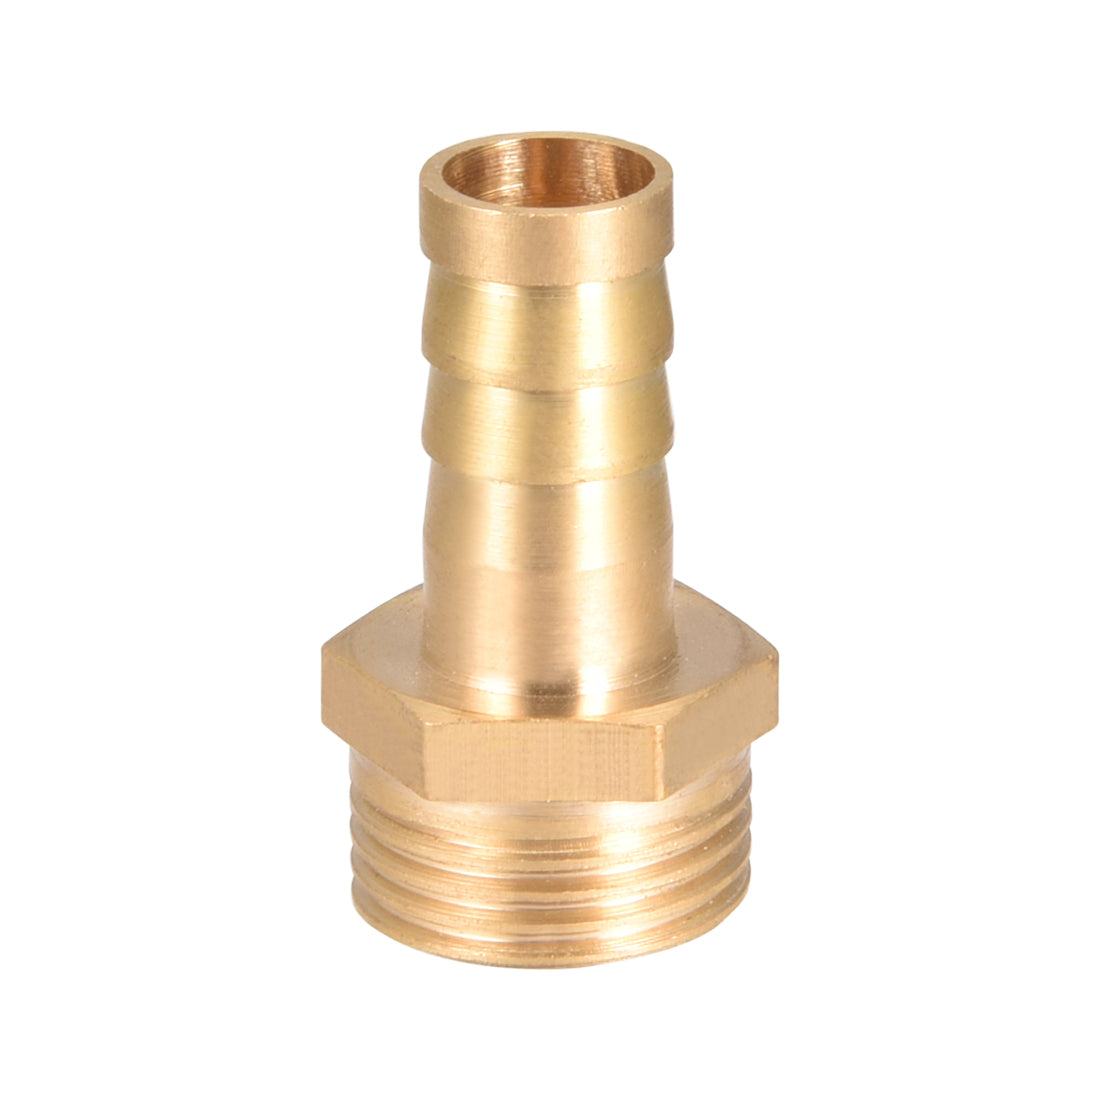 Uxcell Hose Barb Fitting Straight 7mm Barbed G1/8 Male Thread, 4